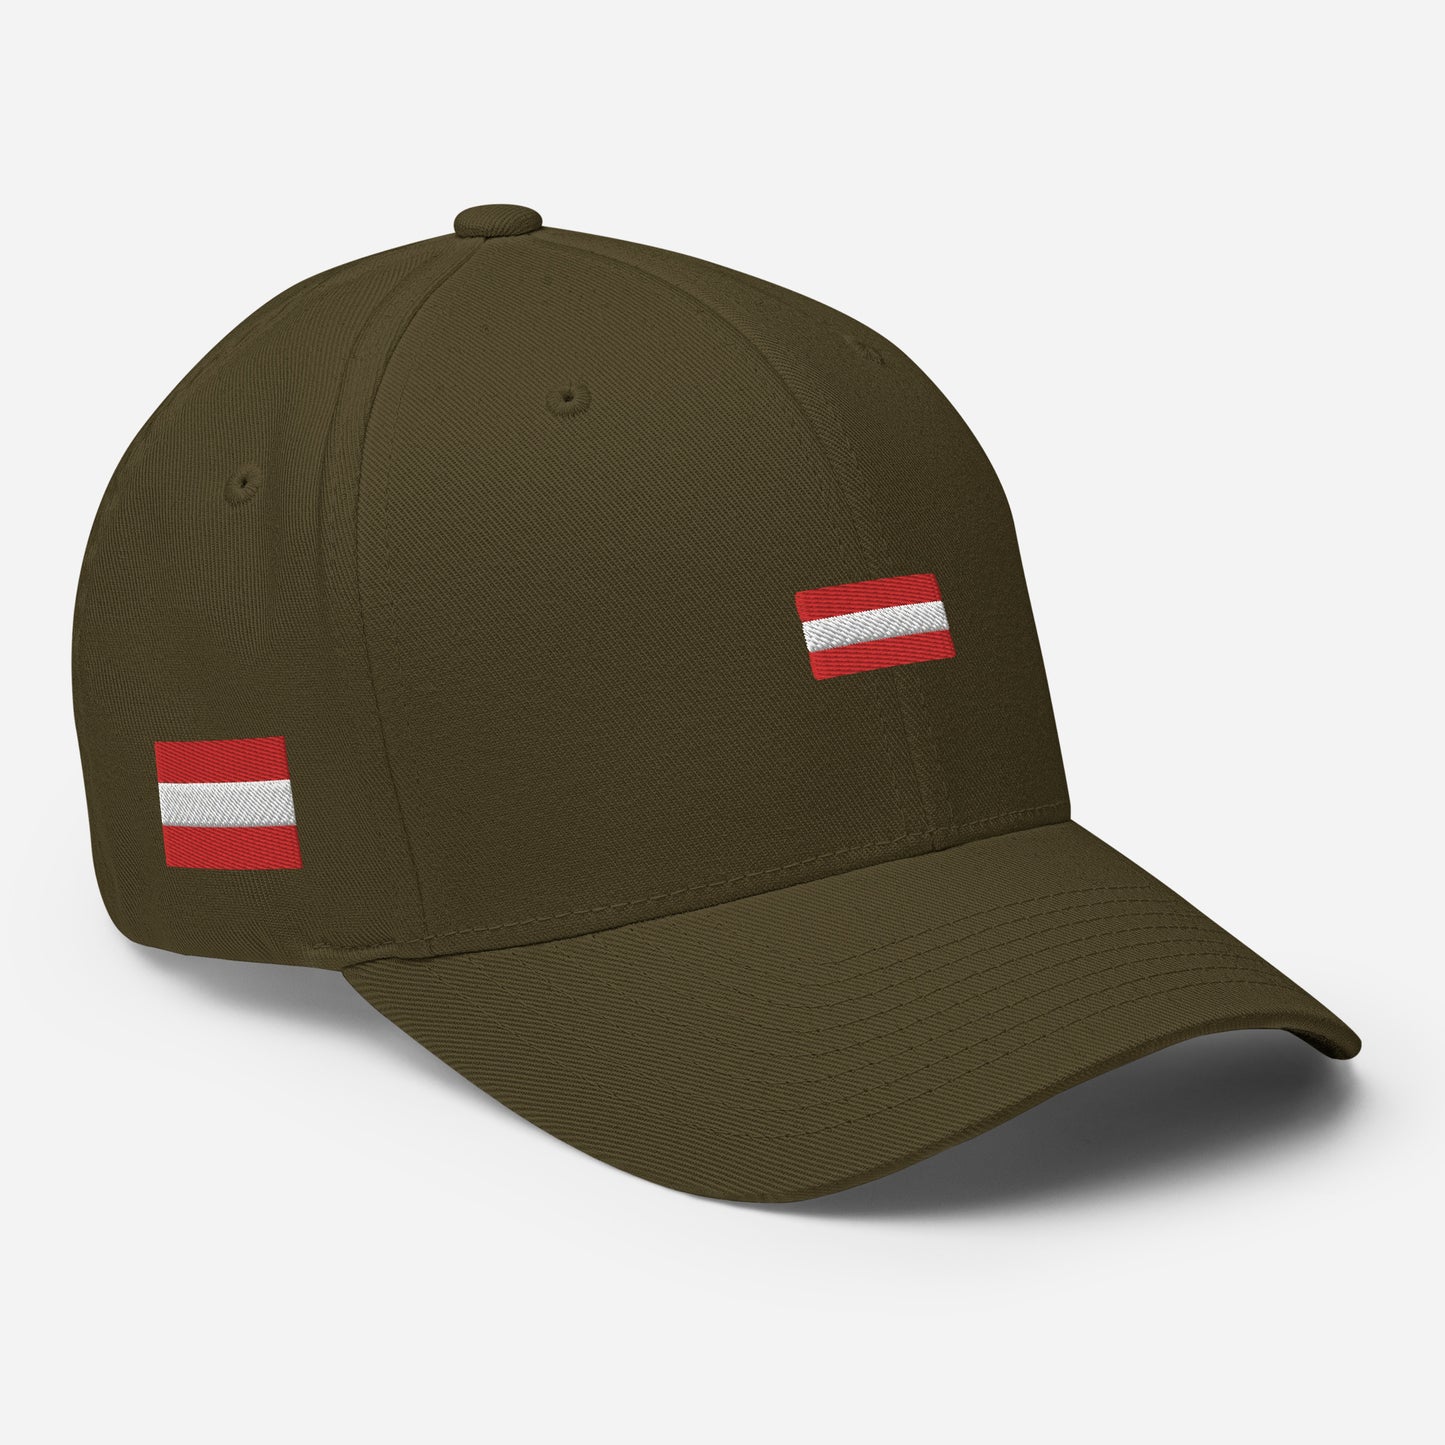 cap-from-the-side-with-austrian-flag